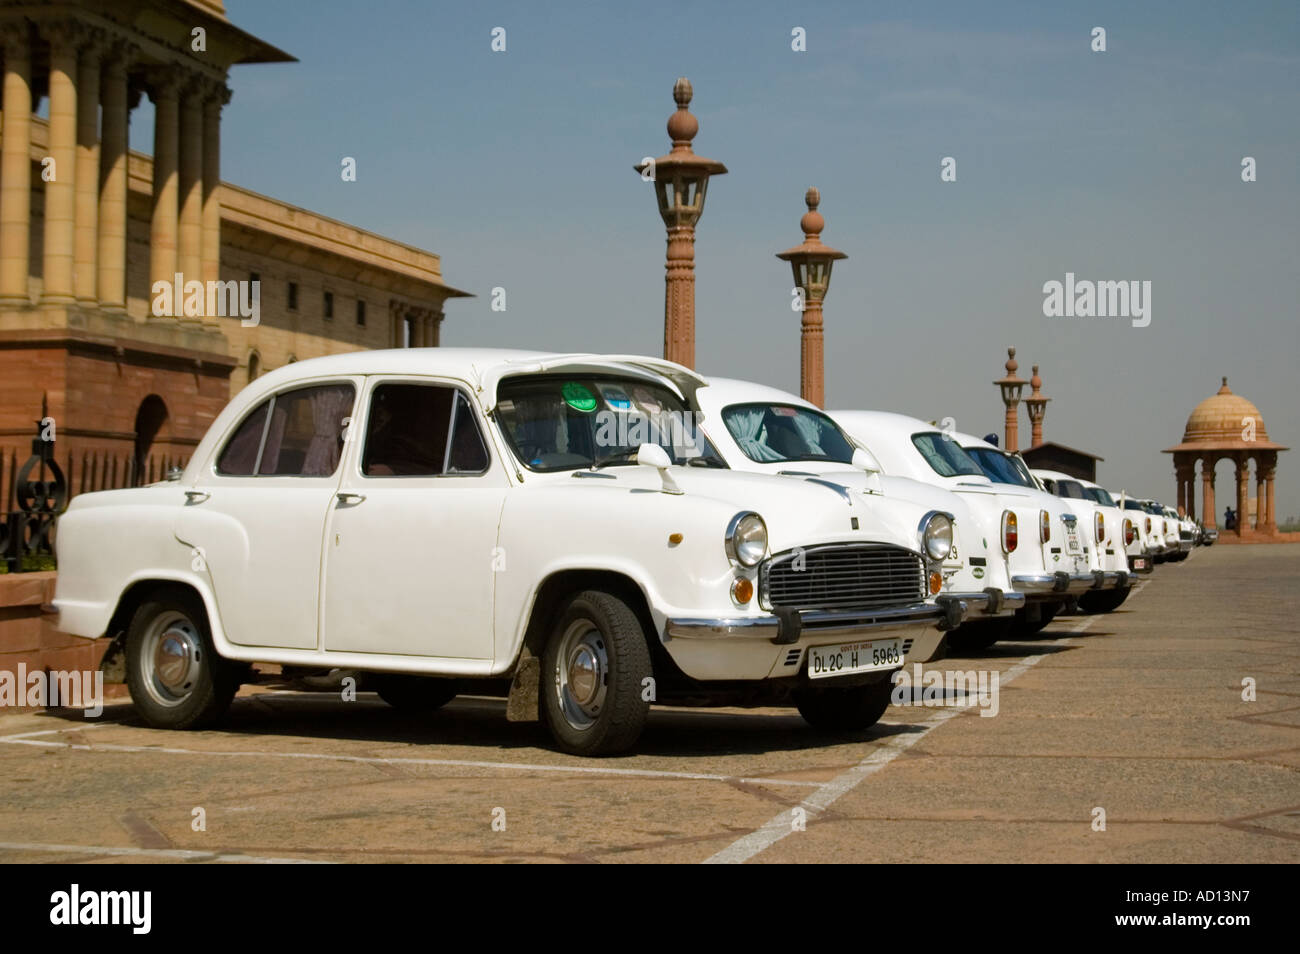 Horizontal view of a row of white Ambassador cars in perfect condition parked outside the government buildings on Raisina Hill. Stock Photo